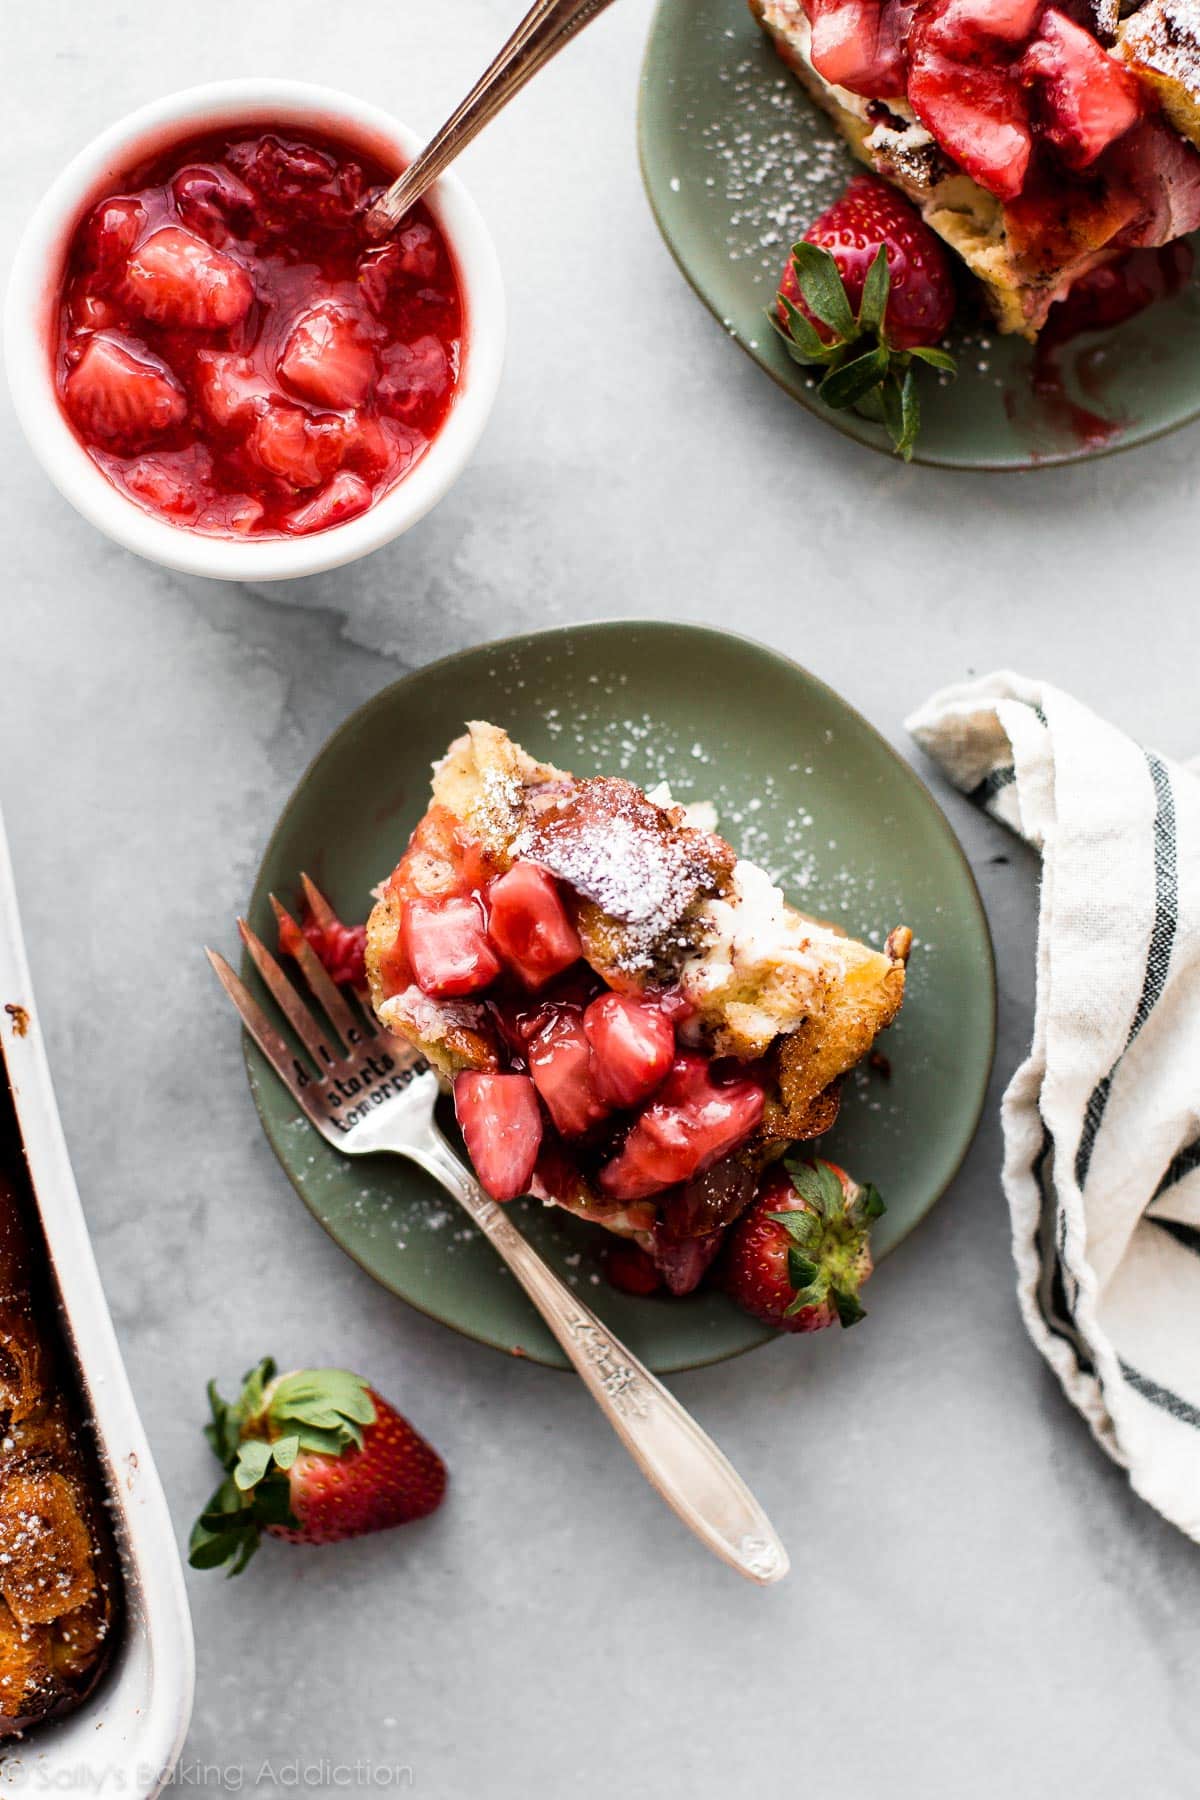 Bake French strawberry toast on a green plate with strawberry dessert on top